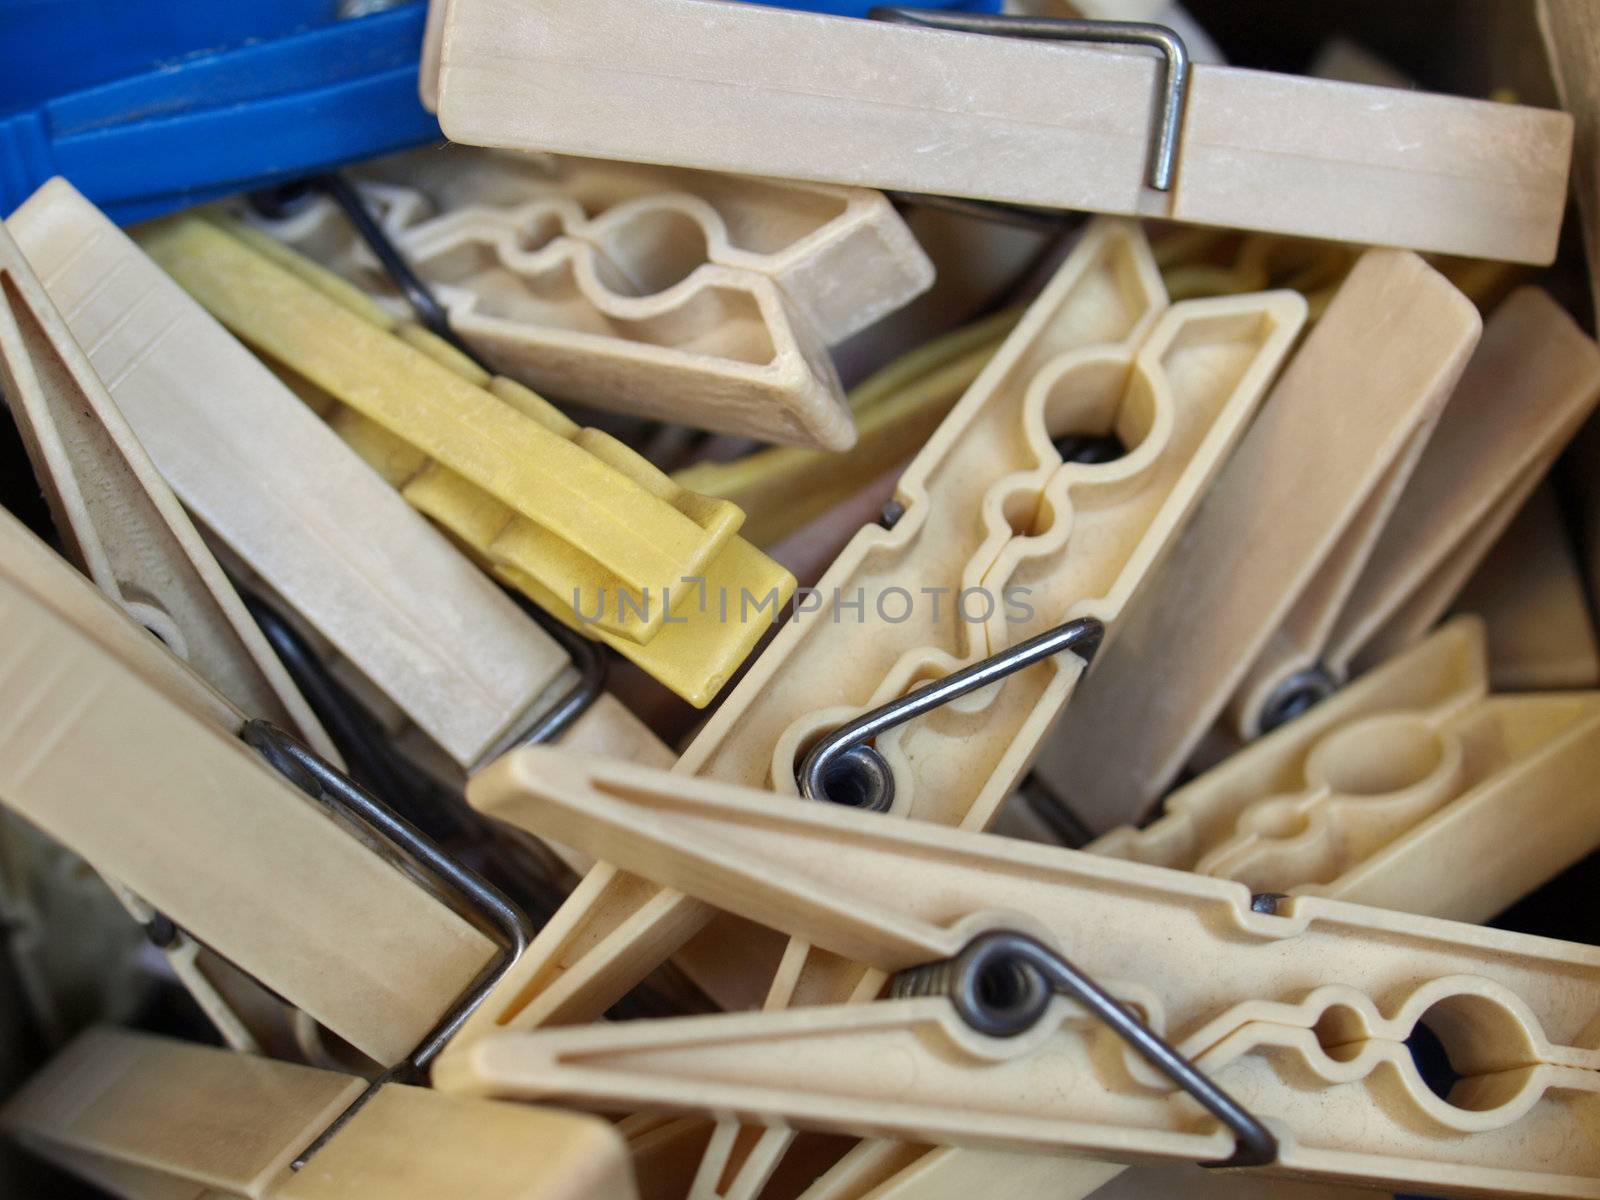 Detail of a range of clothing pegs